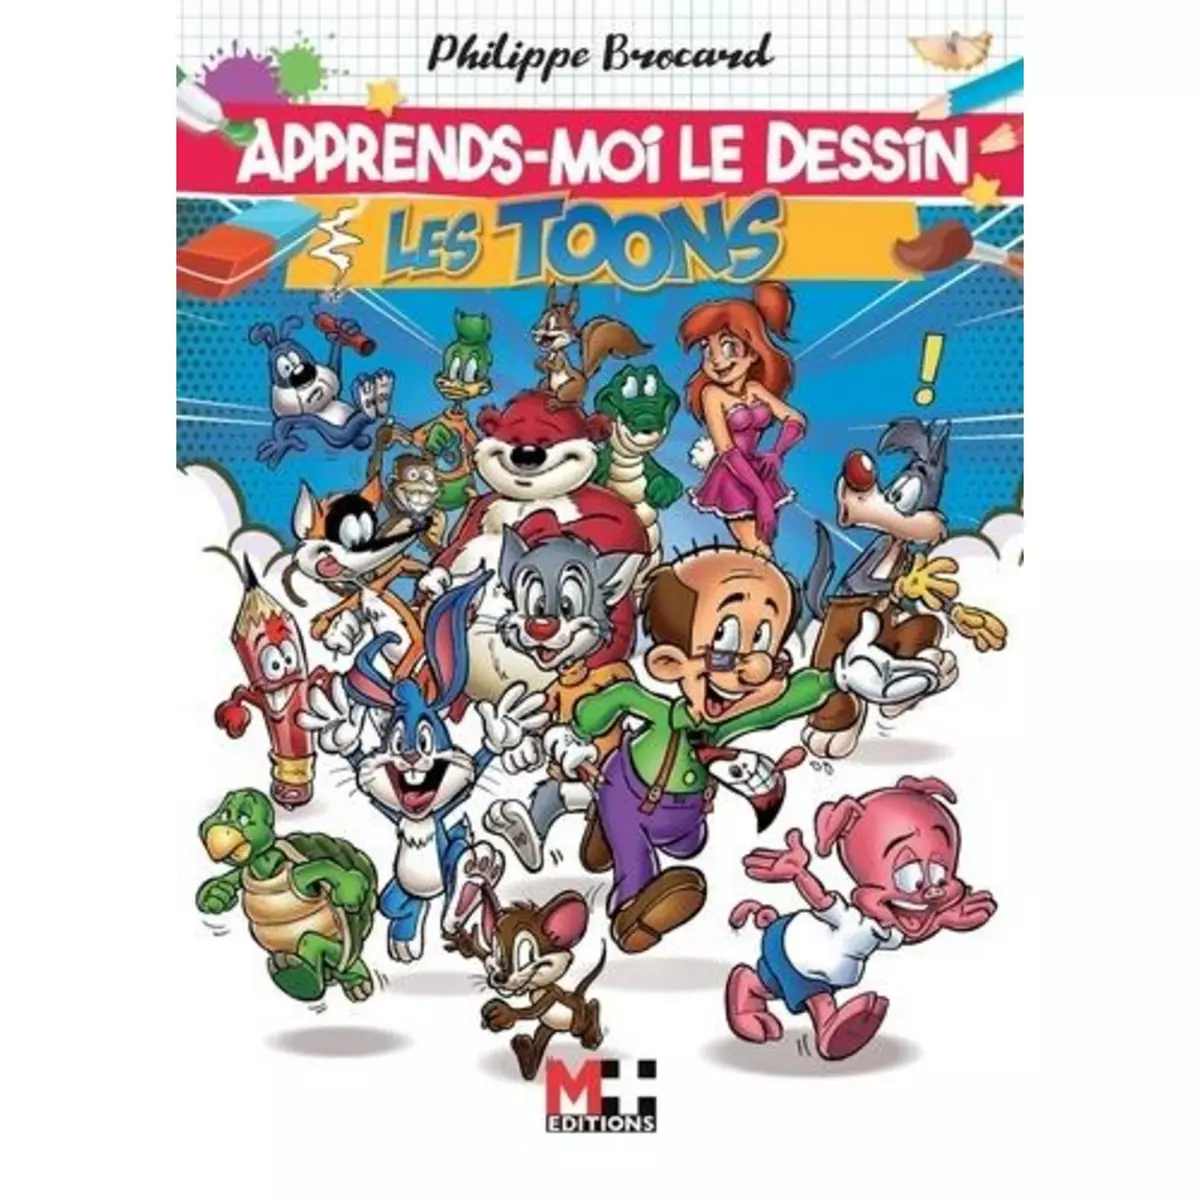  APPRENDS-MOI LE DESSIN. TOME 4, LES TOONS, Brocard Philippe